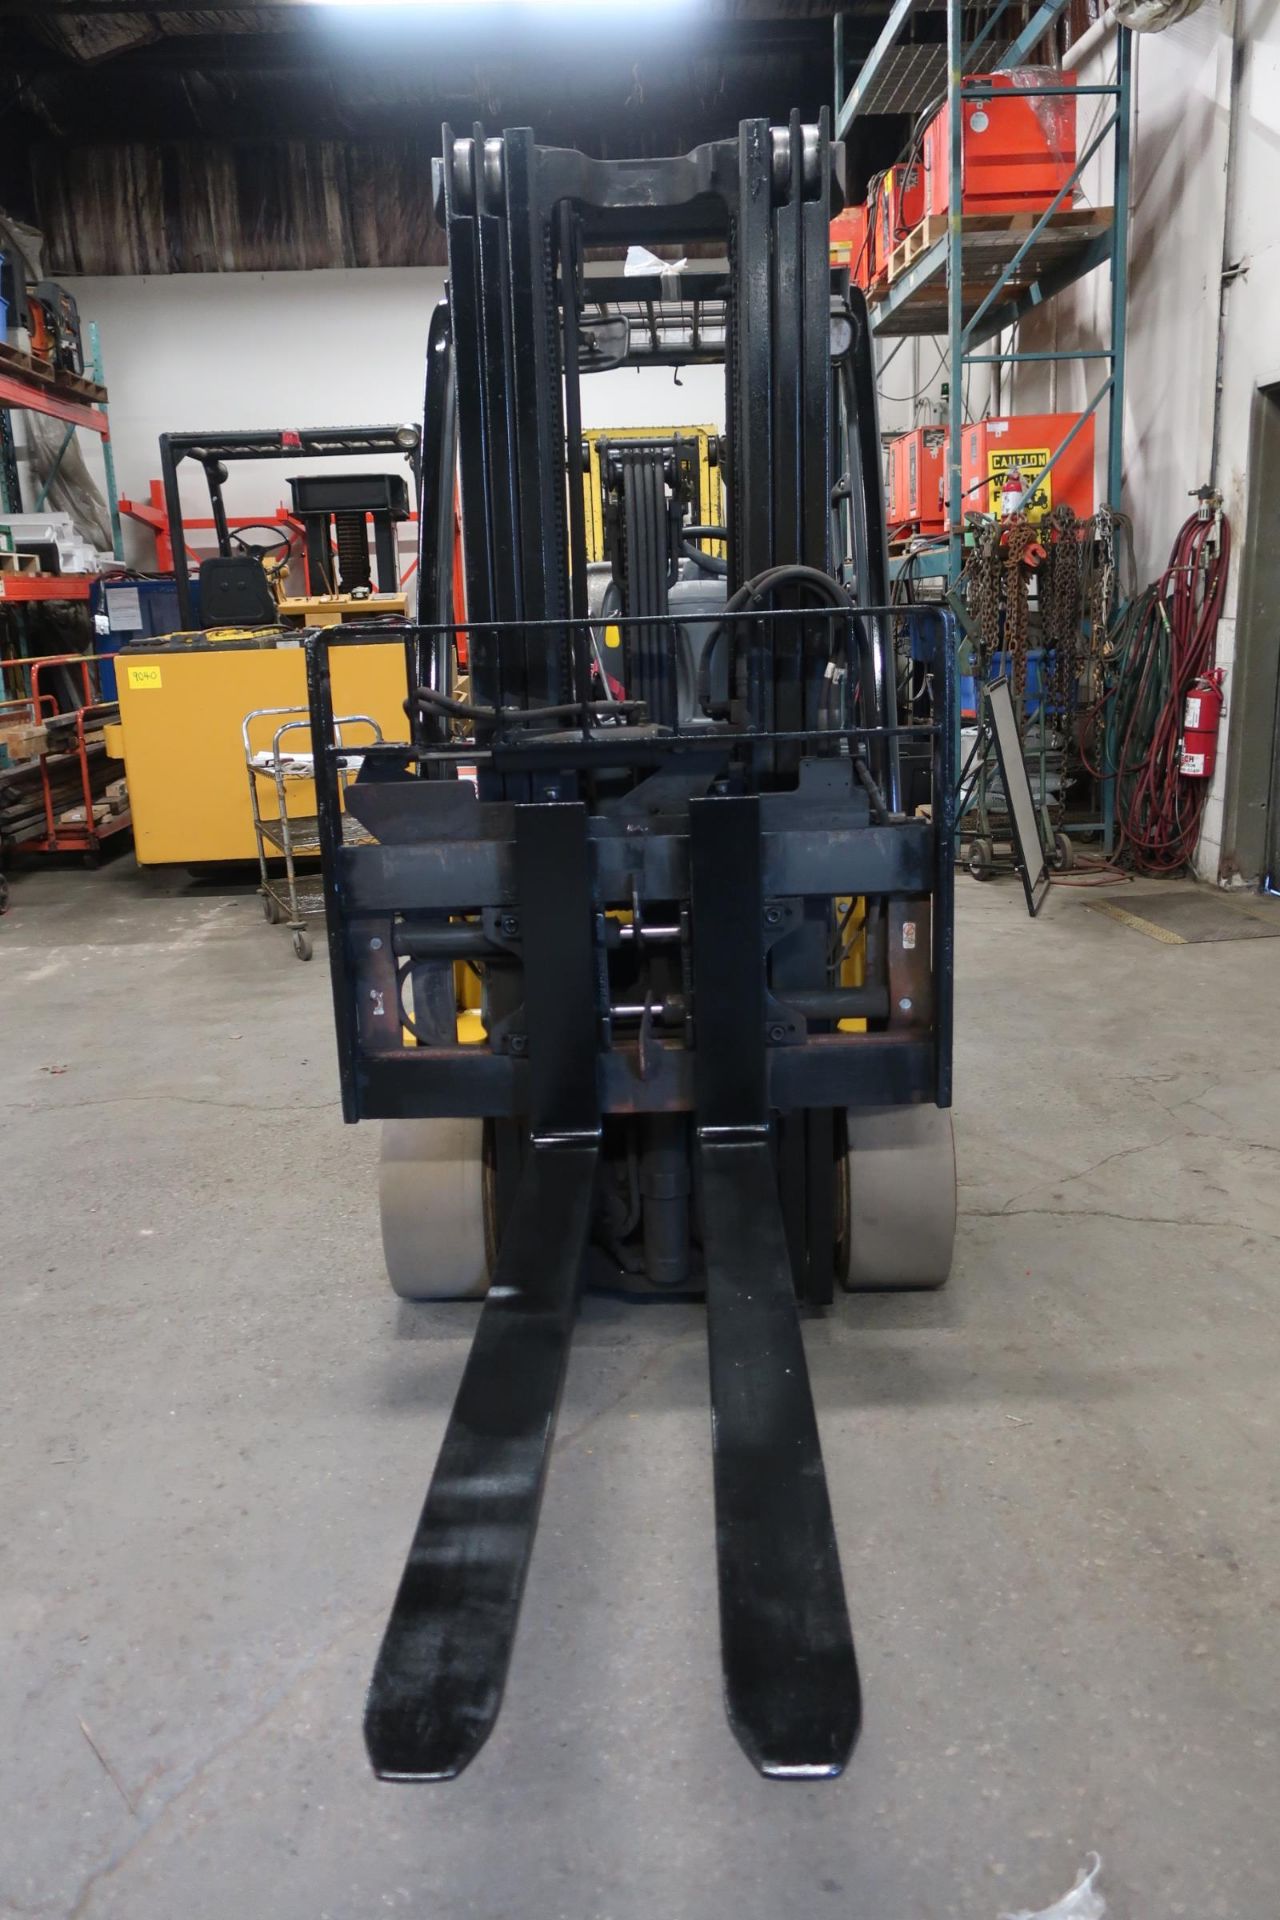 FREE CUSTOMS - 2017 Yale 7000lbs Capacity Forklift with 3-stage mast - LPG (propane) with - Image 2 of 2